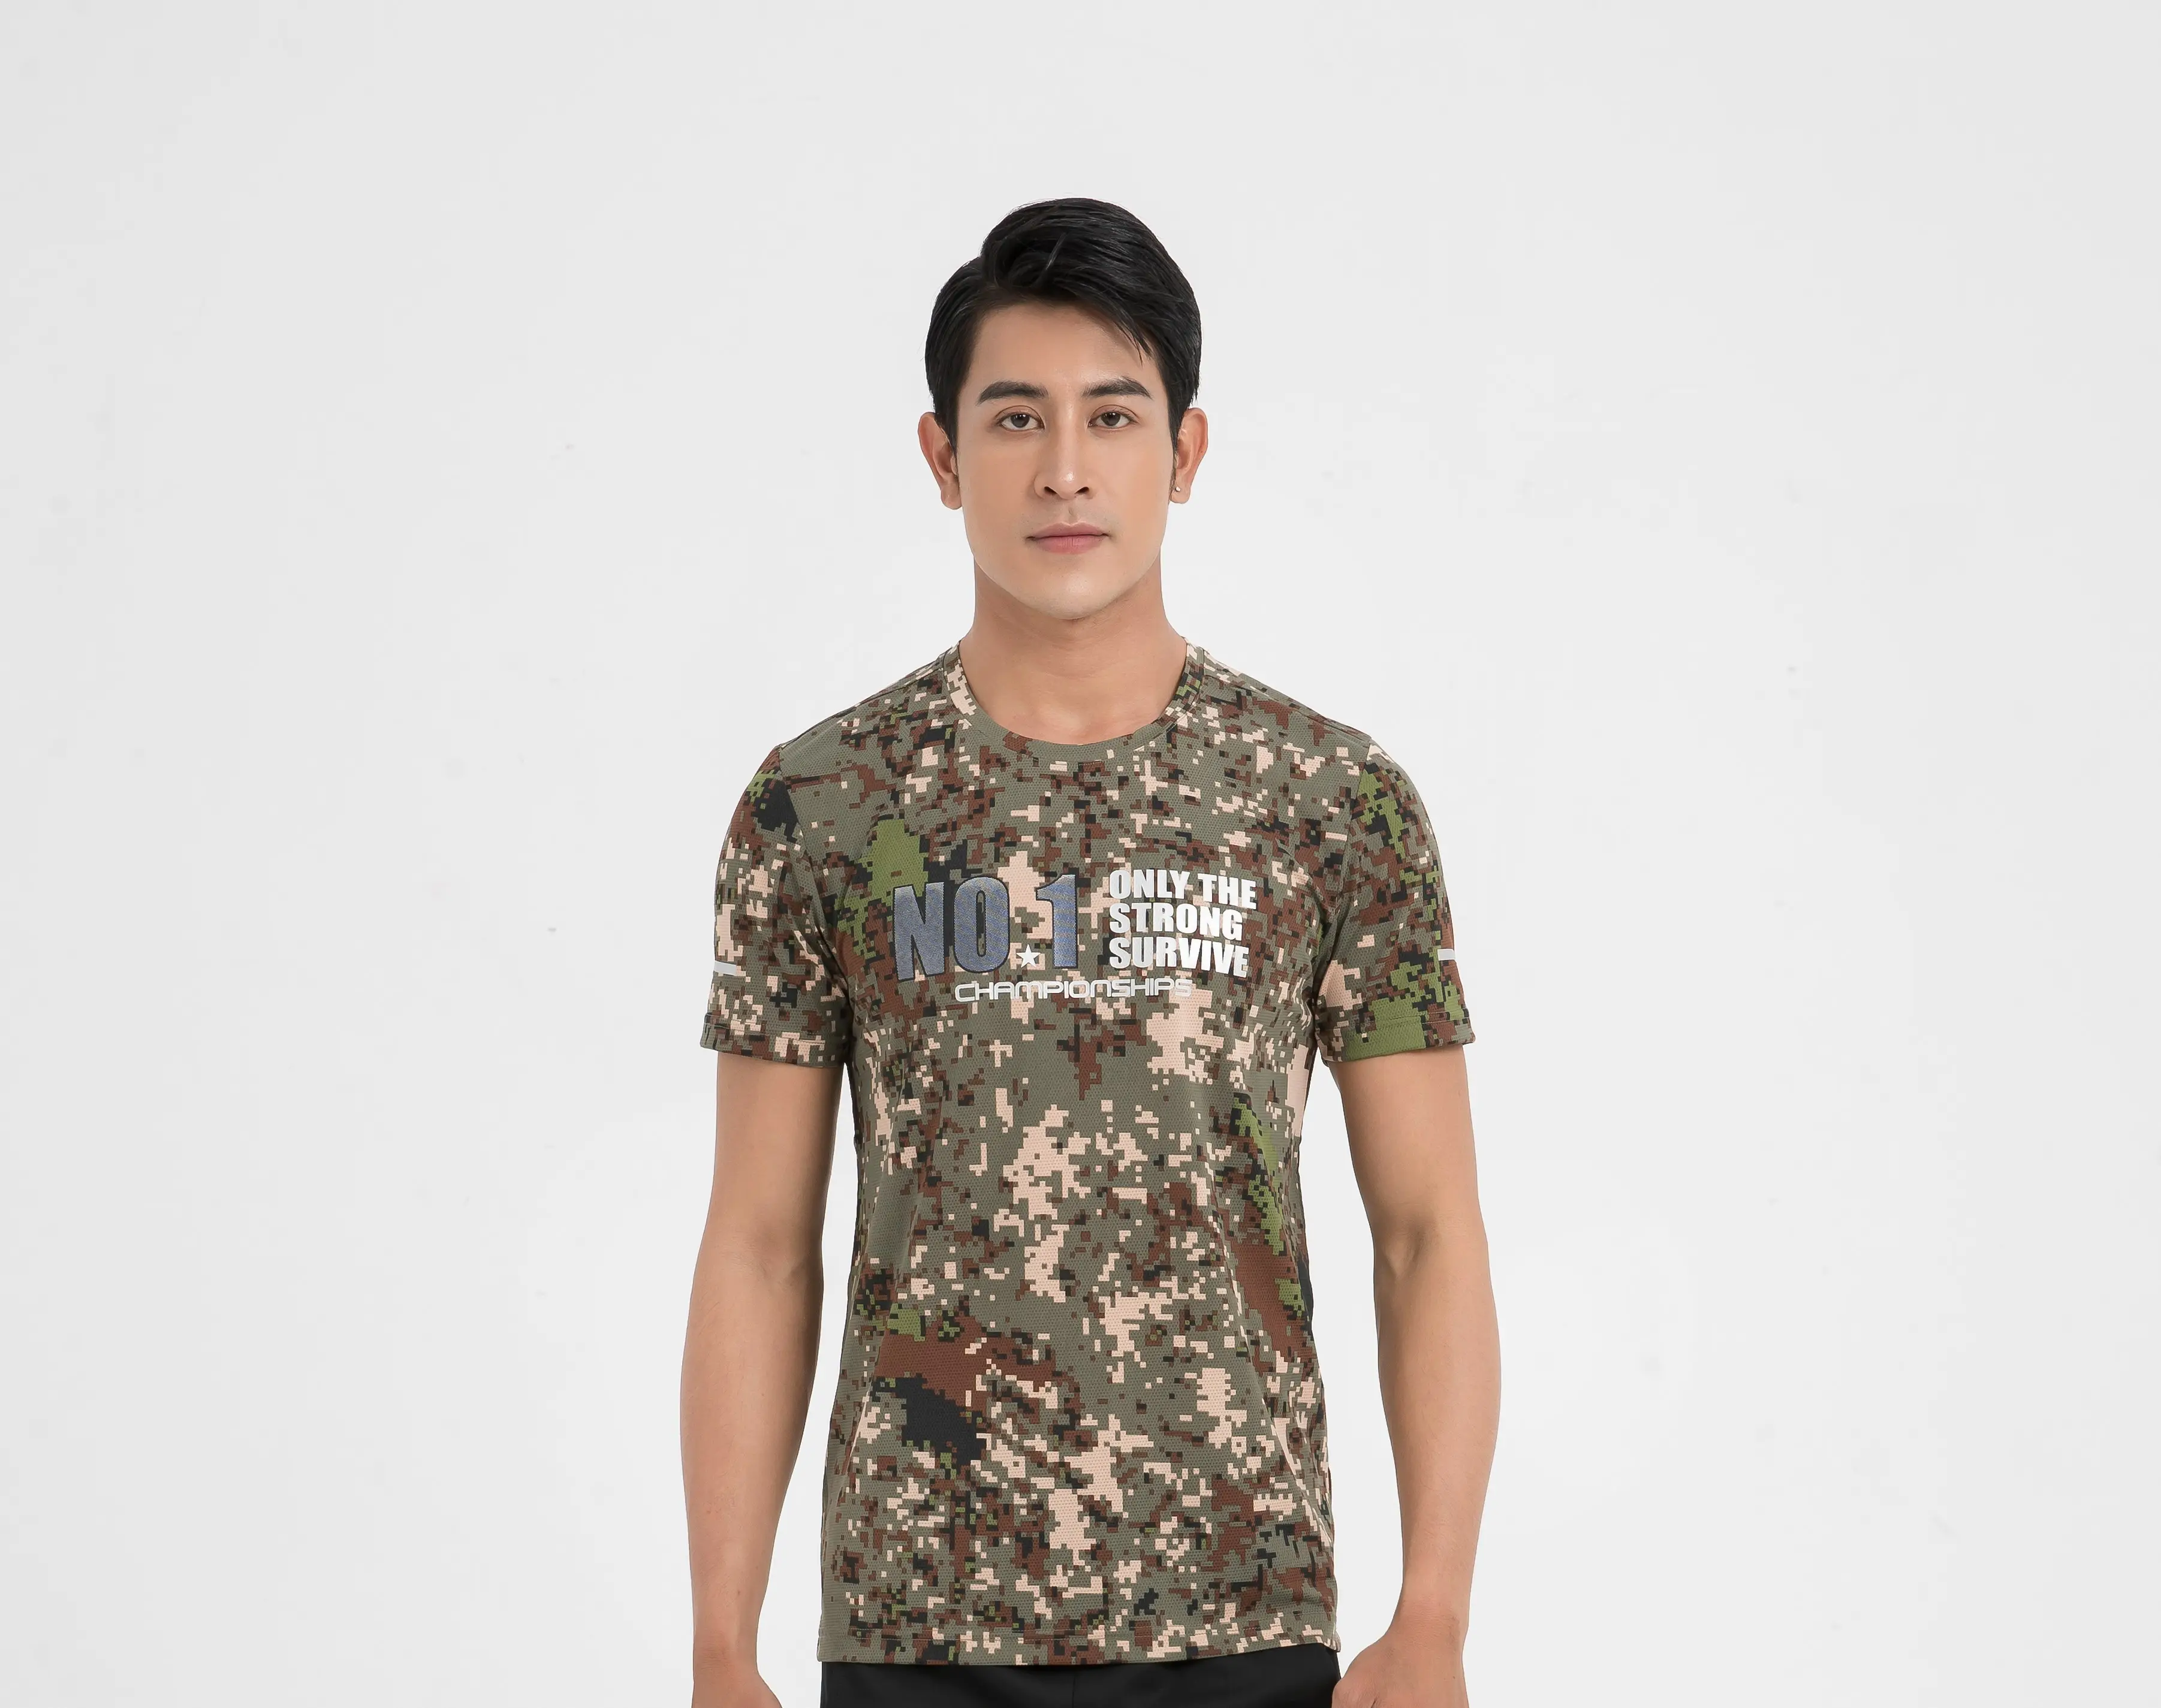 Embroidered DONEX Men's Sports Shirt MC-9050 Fashionable Men's T-shirts from Vietnam Factory Cheap Price